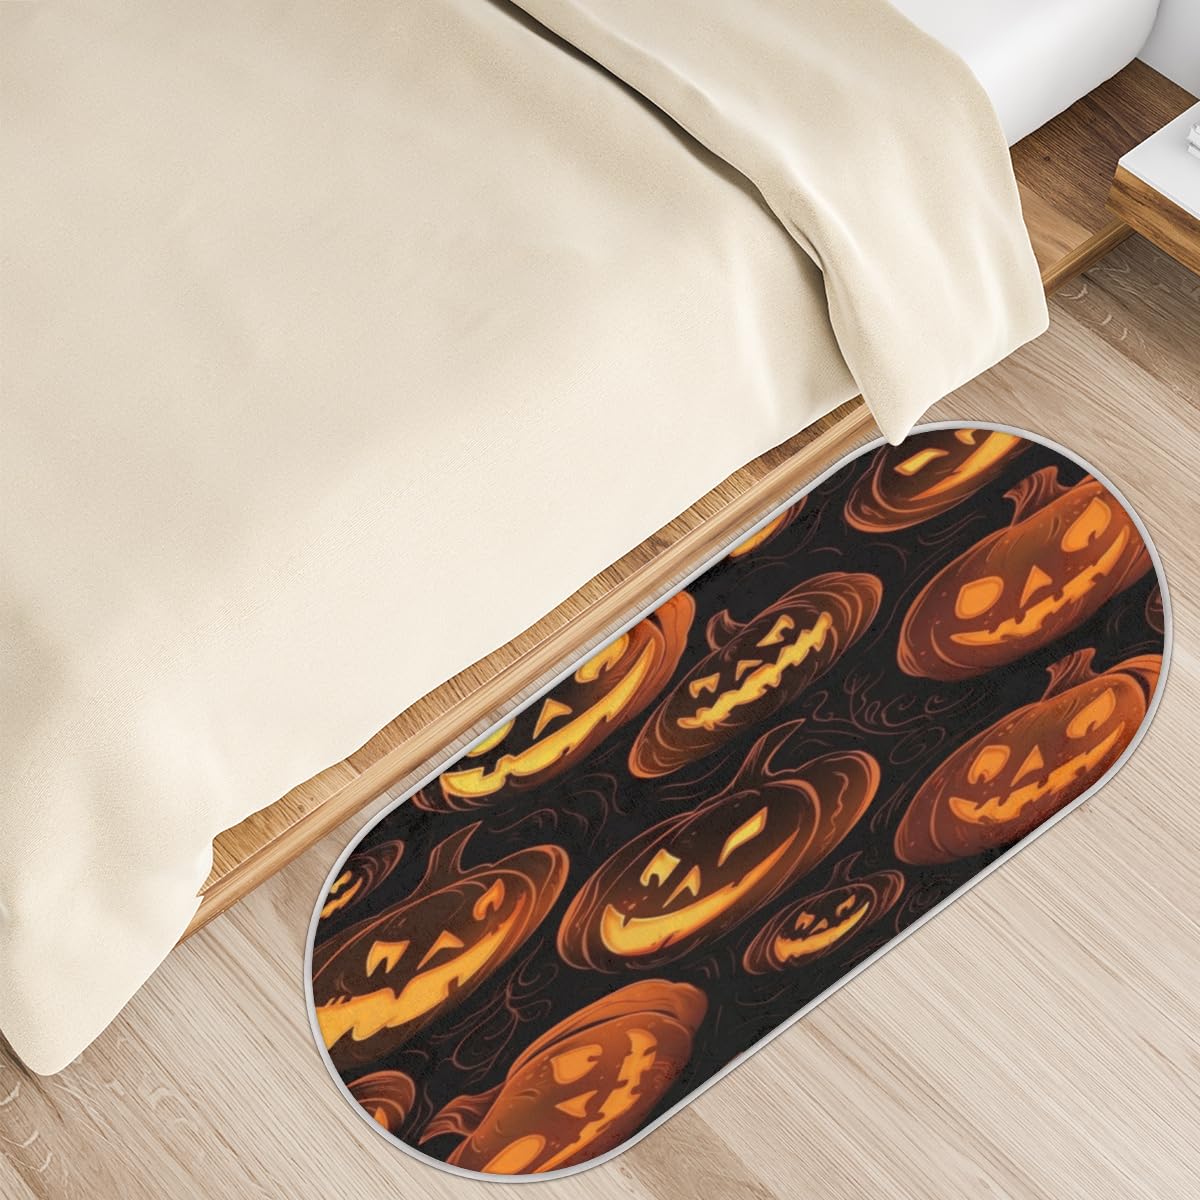 Tavisto Halloween Scary Pumpkins Fluffy Oval Shaggy Rugs for Bedroom Aesthetic Plush Floor Mat - Soft and Absorbent - Ideal for Living Room,Home Decor, and Playrooms